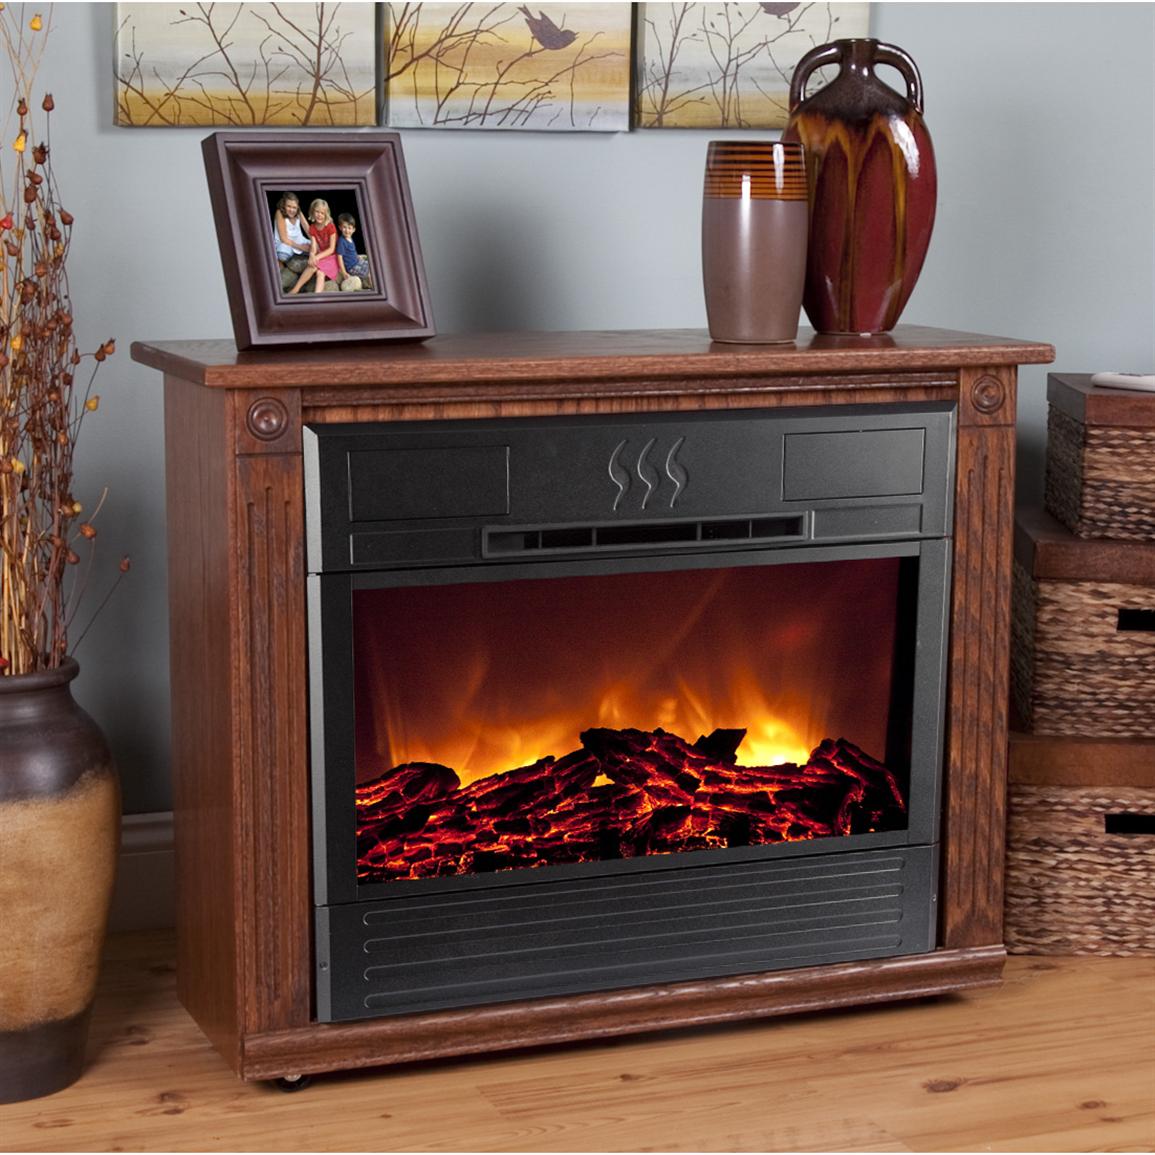 Heat Surge Roll N Glow Electric Fireplace 220084 Fireplaces At 